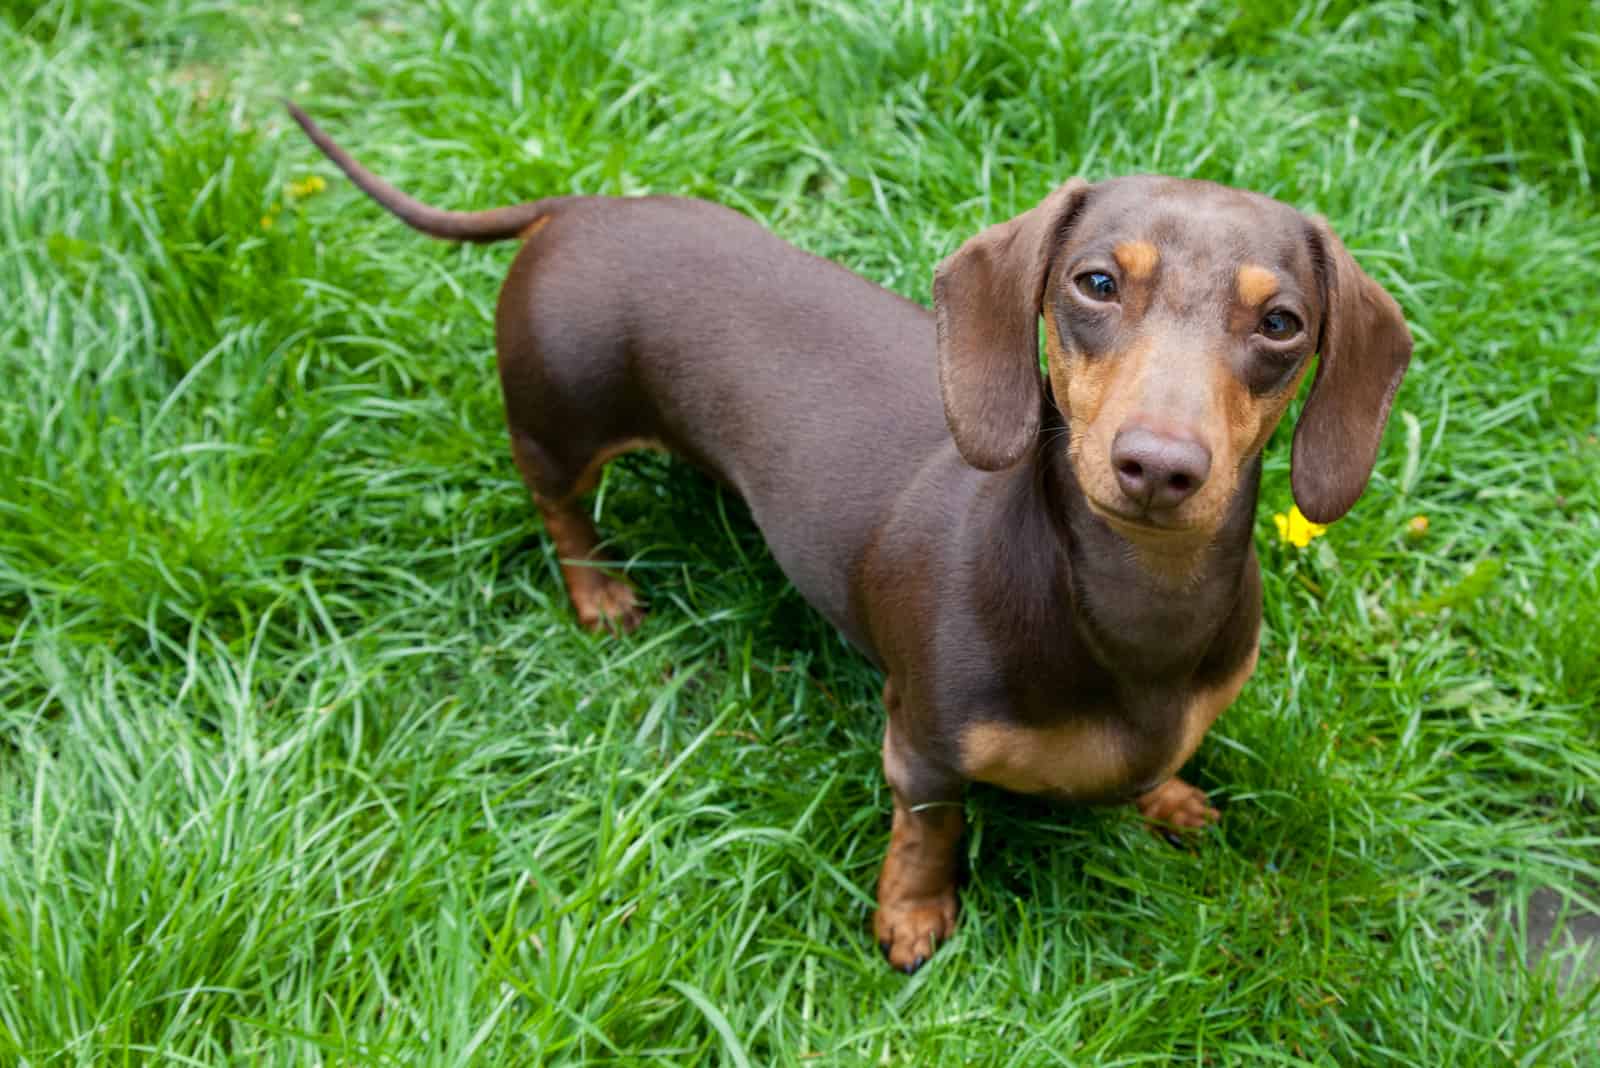 Dachshund standing on grass looking up